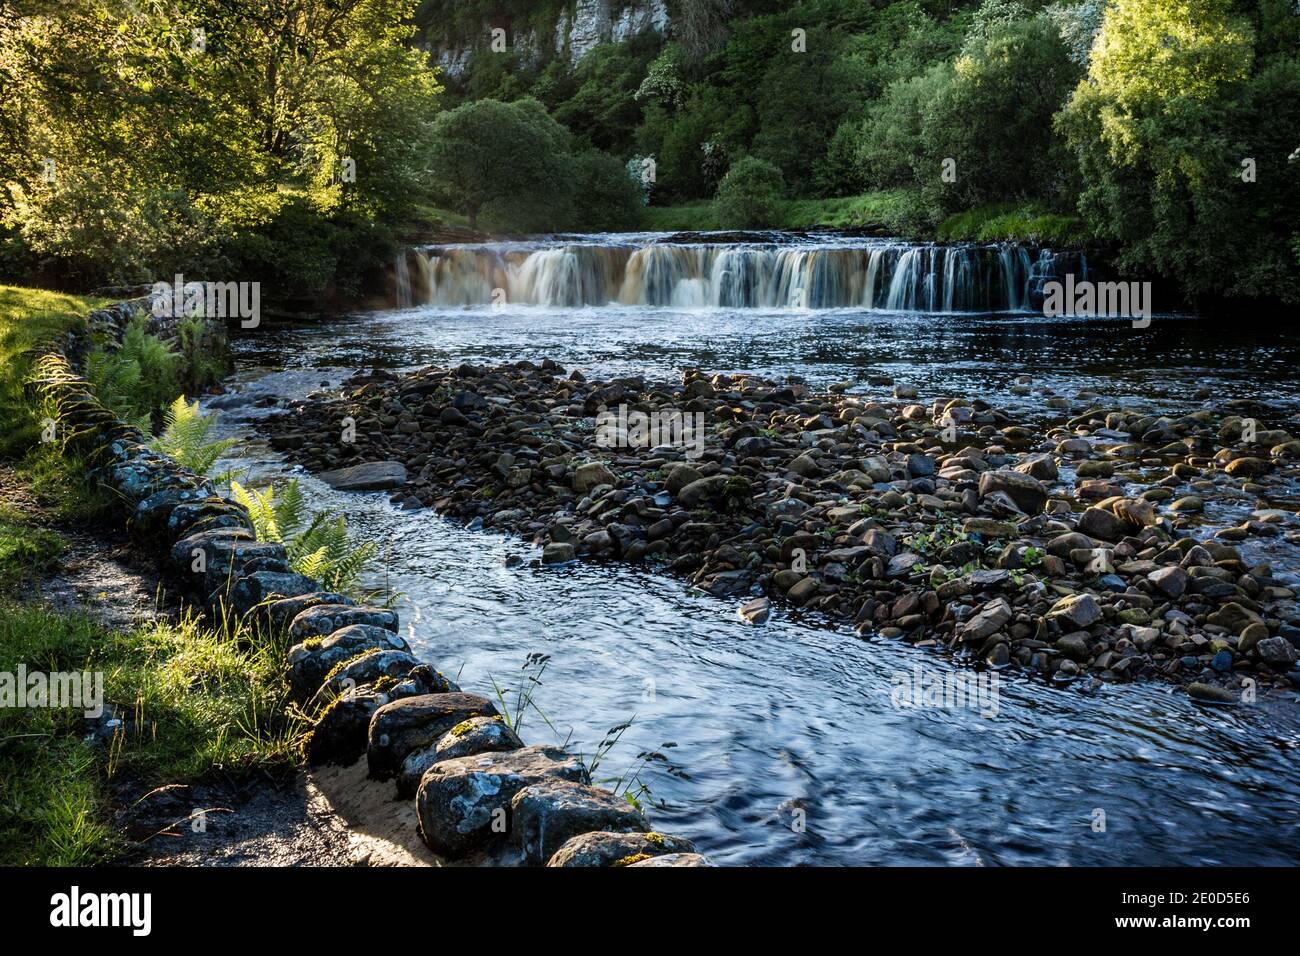 Wain Wath Force sul fiume Swale vicino a Keld, Swaledale, Yorkshire Dales National Park, Inghilterra Foto Stock